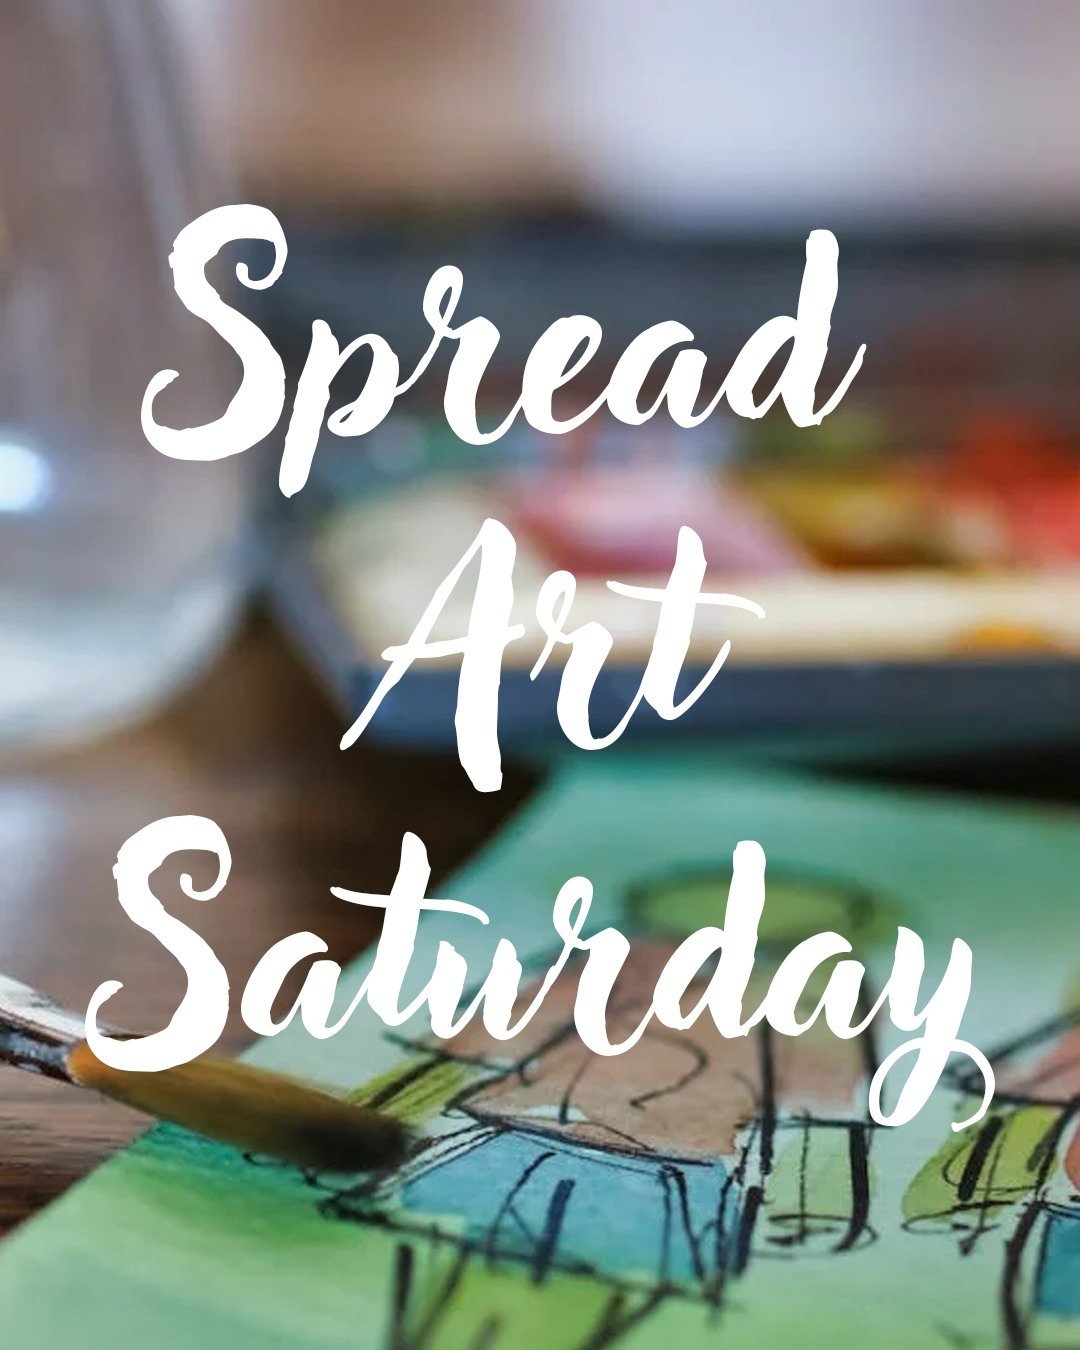 Don't forget to spread some art today! Maybe today you could gift a small artwork to someone in your community who needs it.
#spreadart